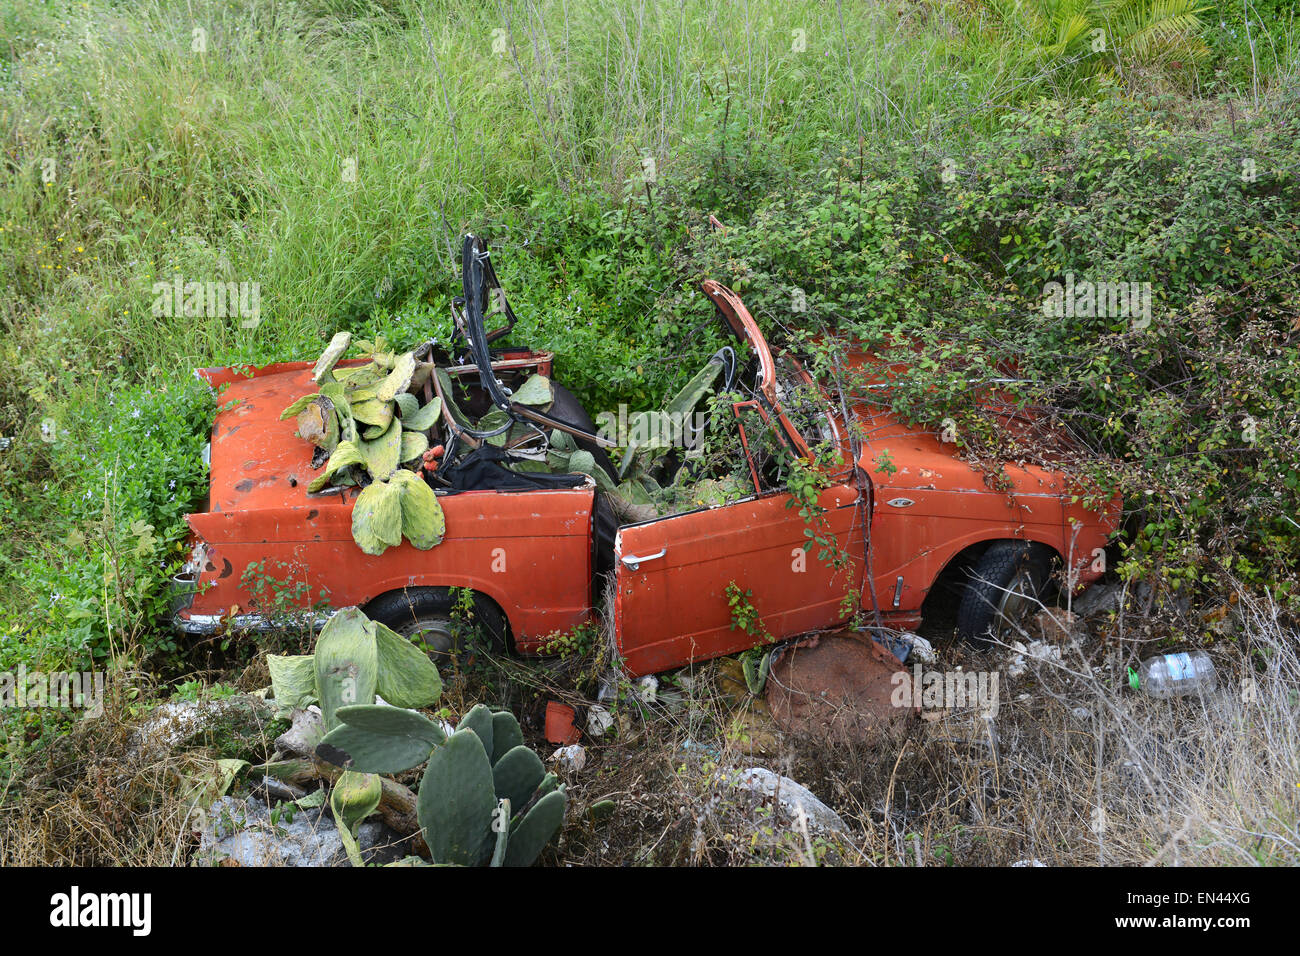 Old abandoned Triumph Herald car rotting away amongst cacti vegetation in Spain Stock Photo